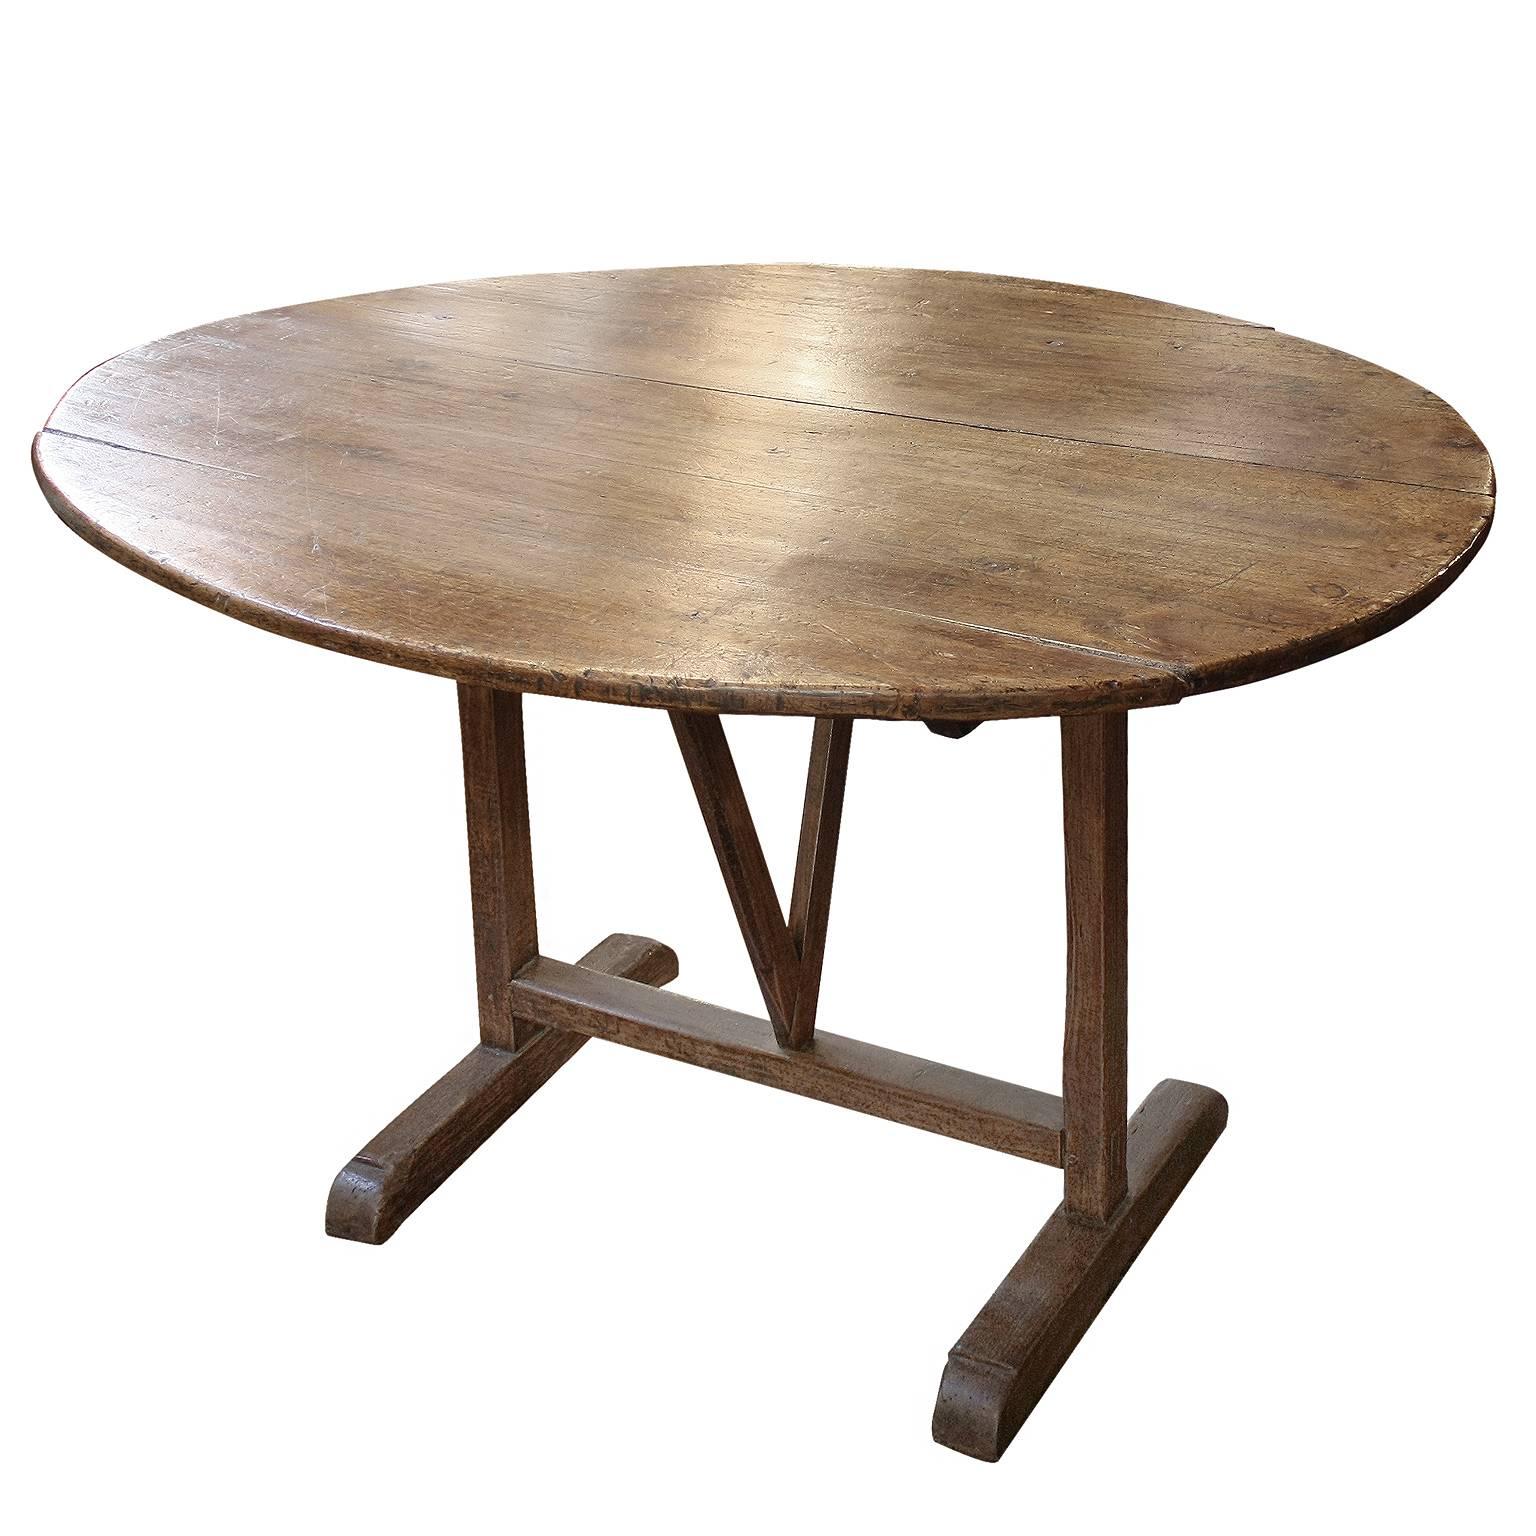 A European contemporary oval shaped elm and poplar wine tasting table. We're always looking to find good looking wine tasting tables and we weren't disappointed when we found this oval shaped one. The top is raised on an H-form base with butterfly